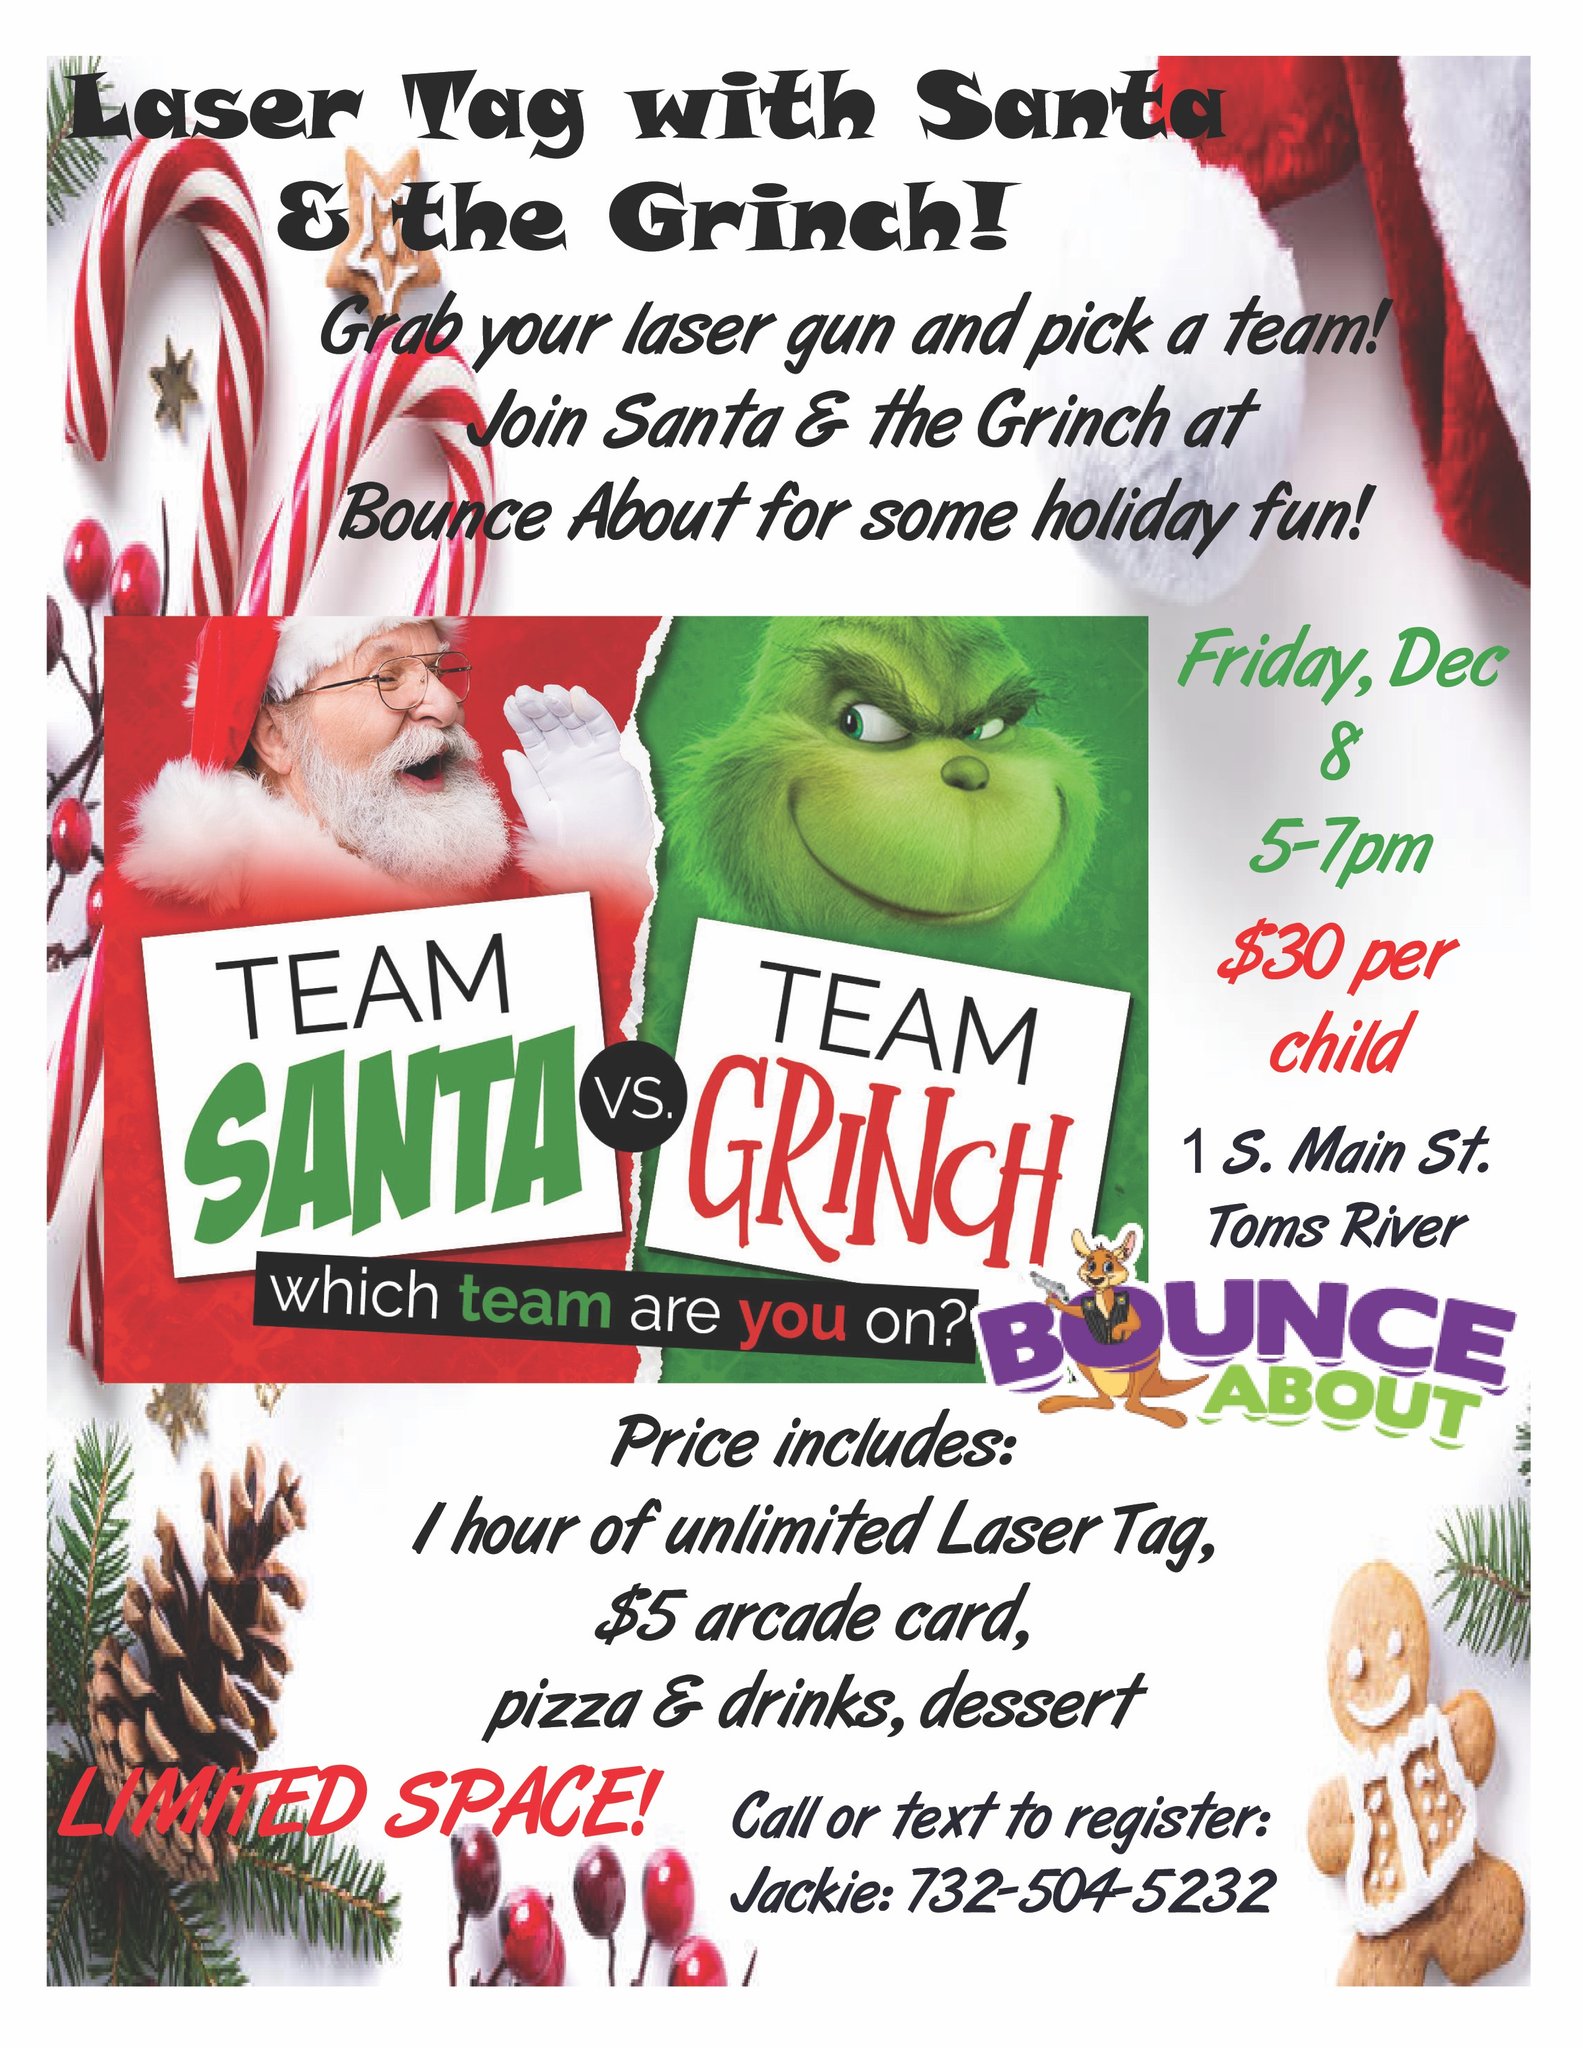 Grinch Day is December 1st! - News and Announcements 